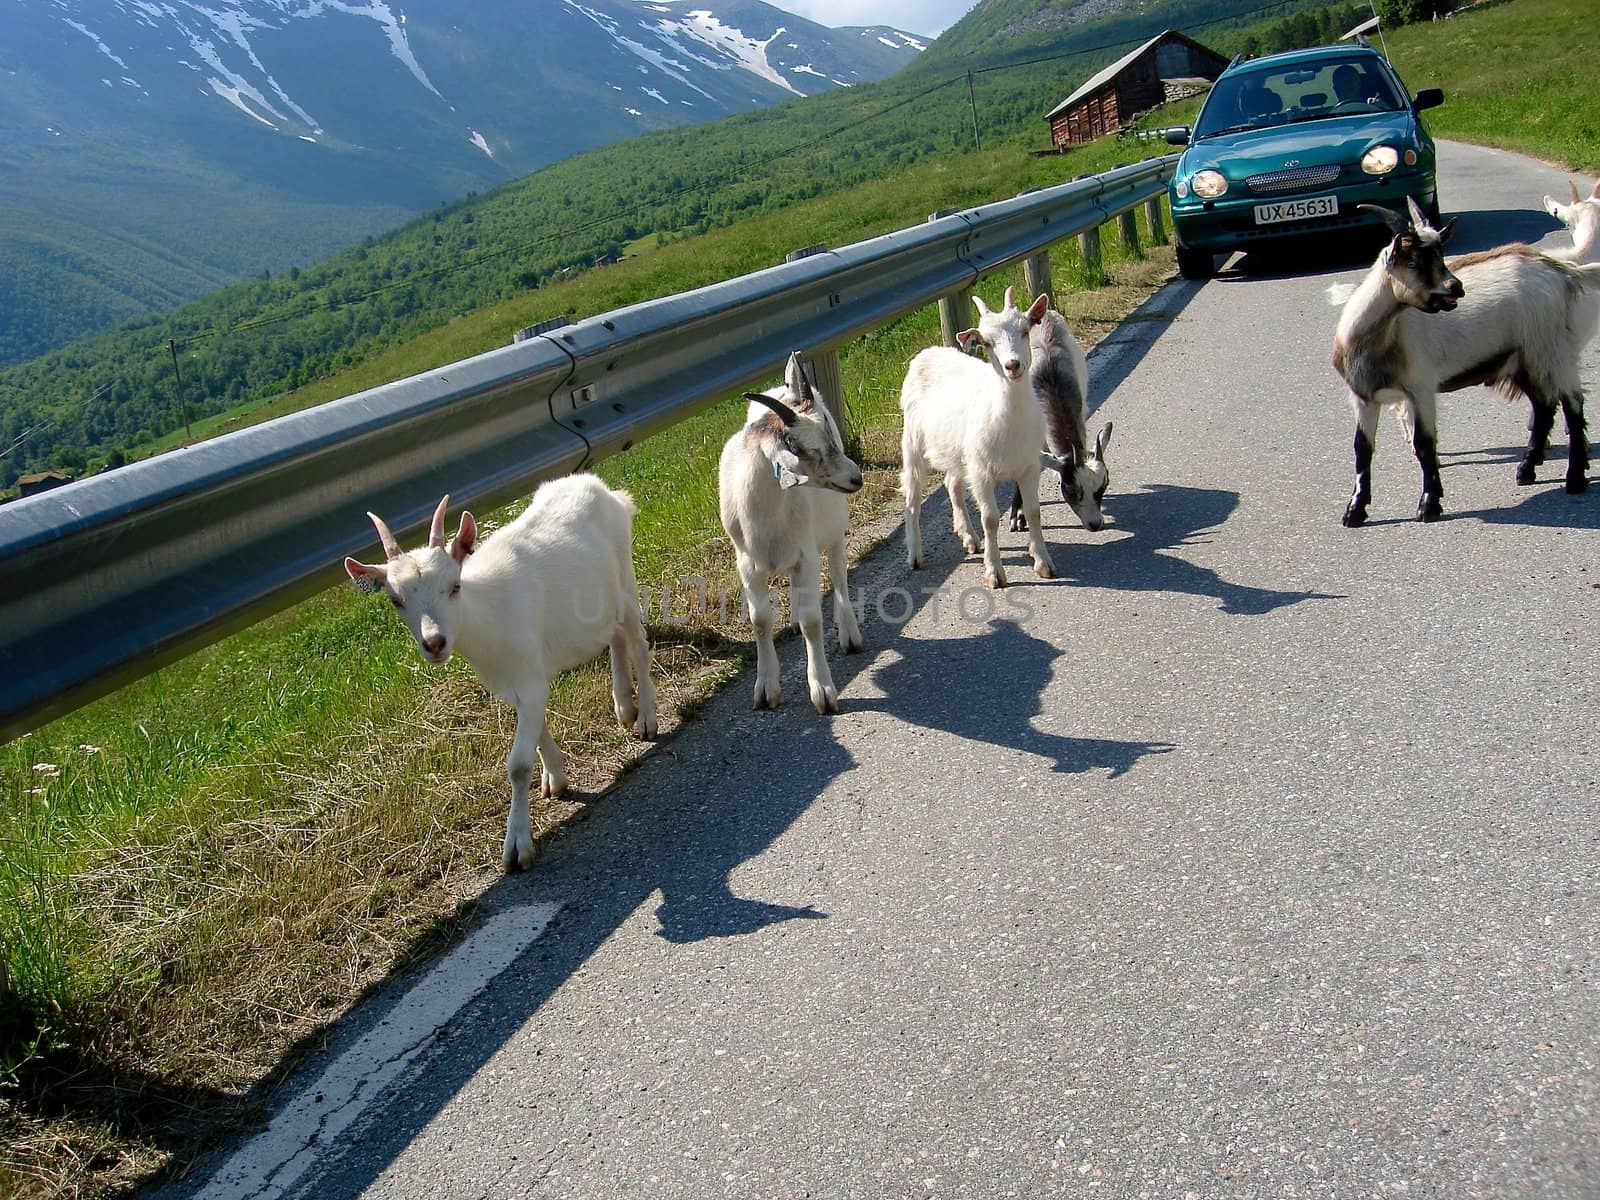 goats walking through the highway. Please note: No negative use allowed.